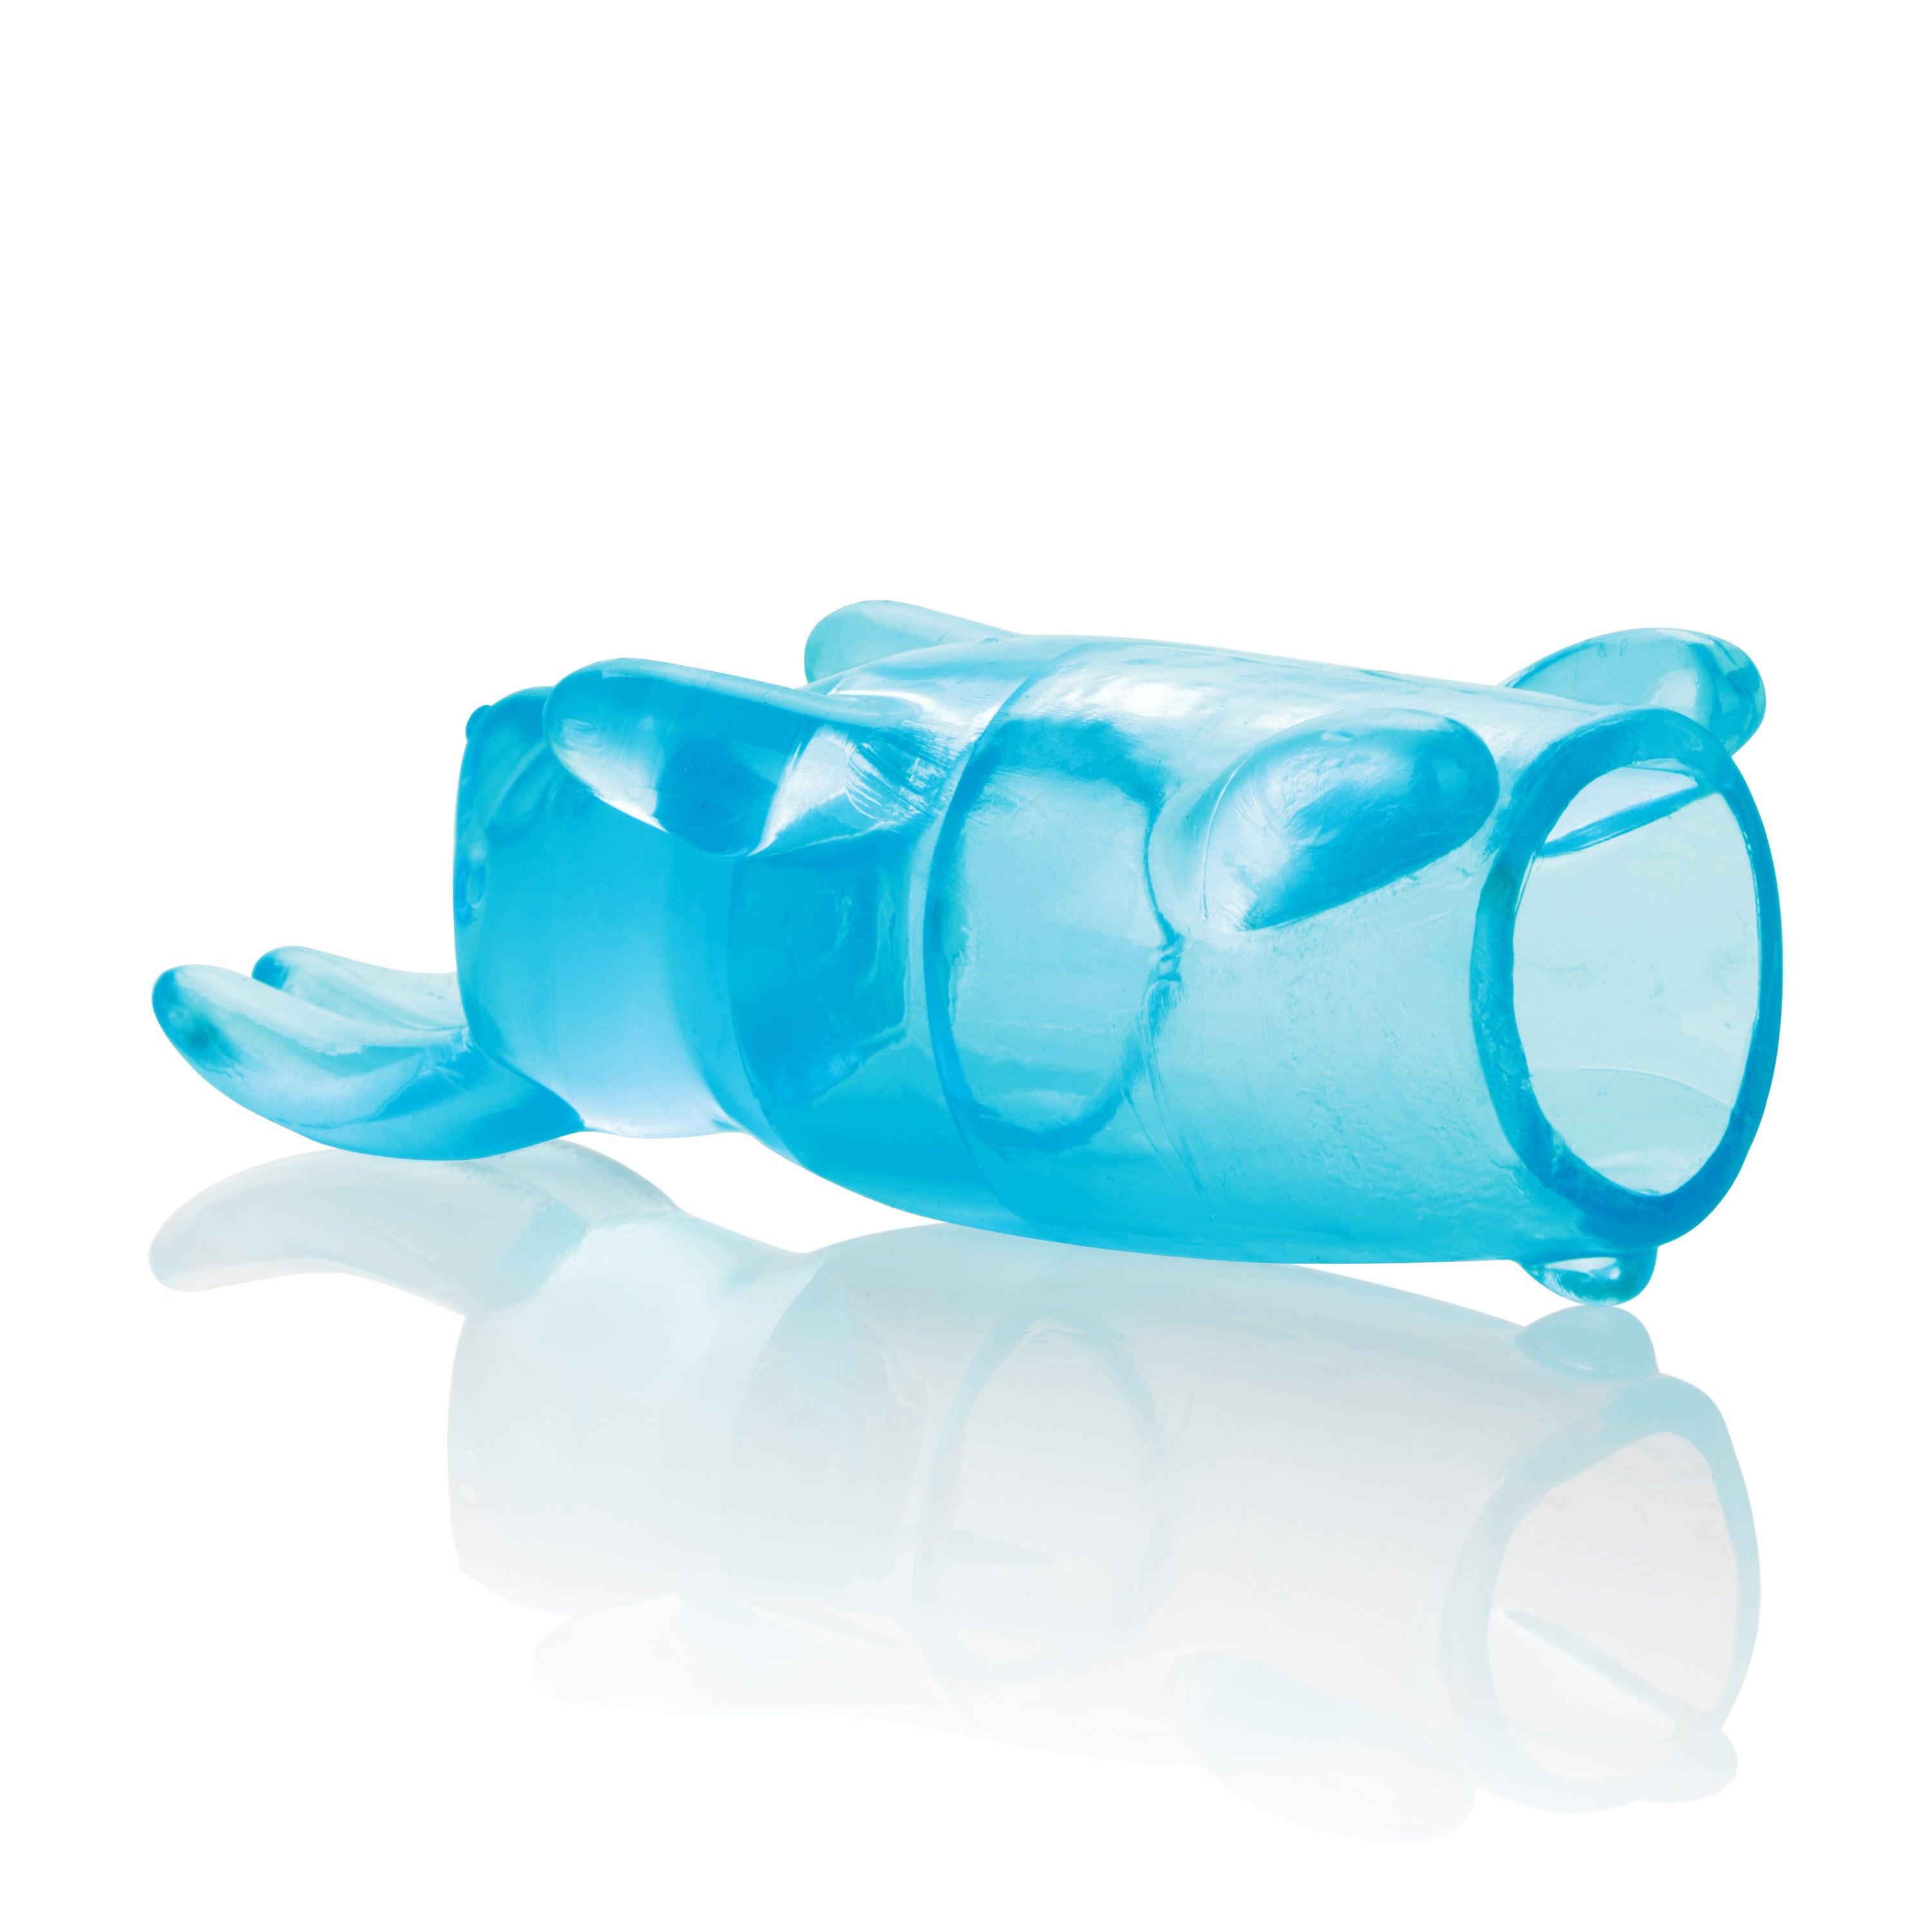 Shane's World Pocket Party Blue | Compact Massager with Removable Flickering Bunny Sleeve